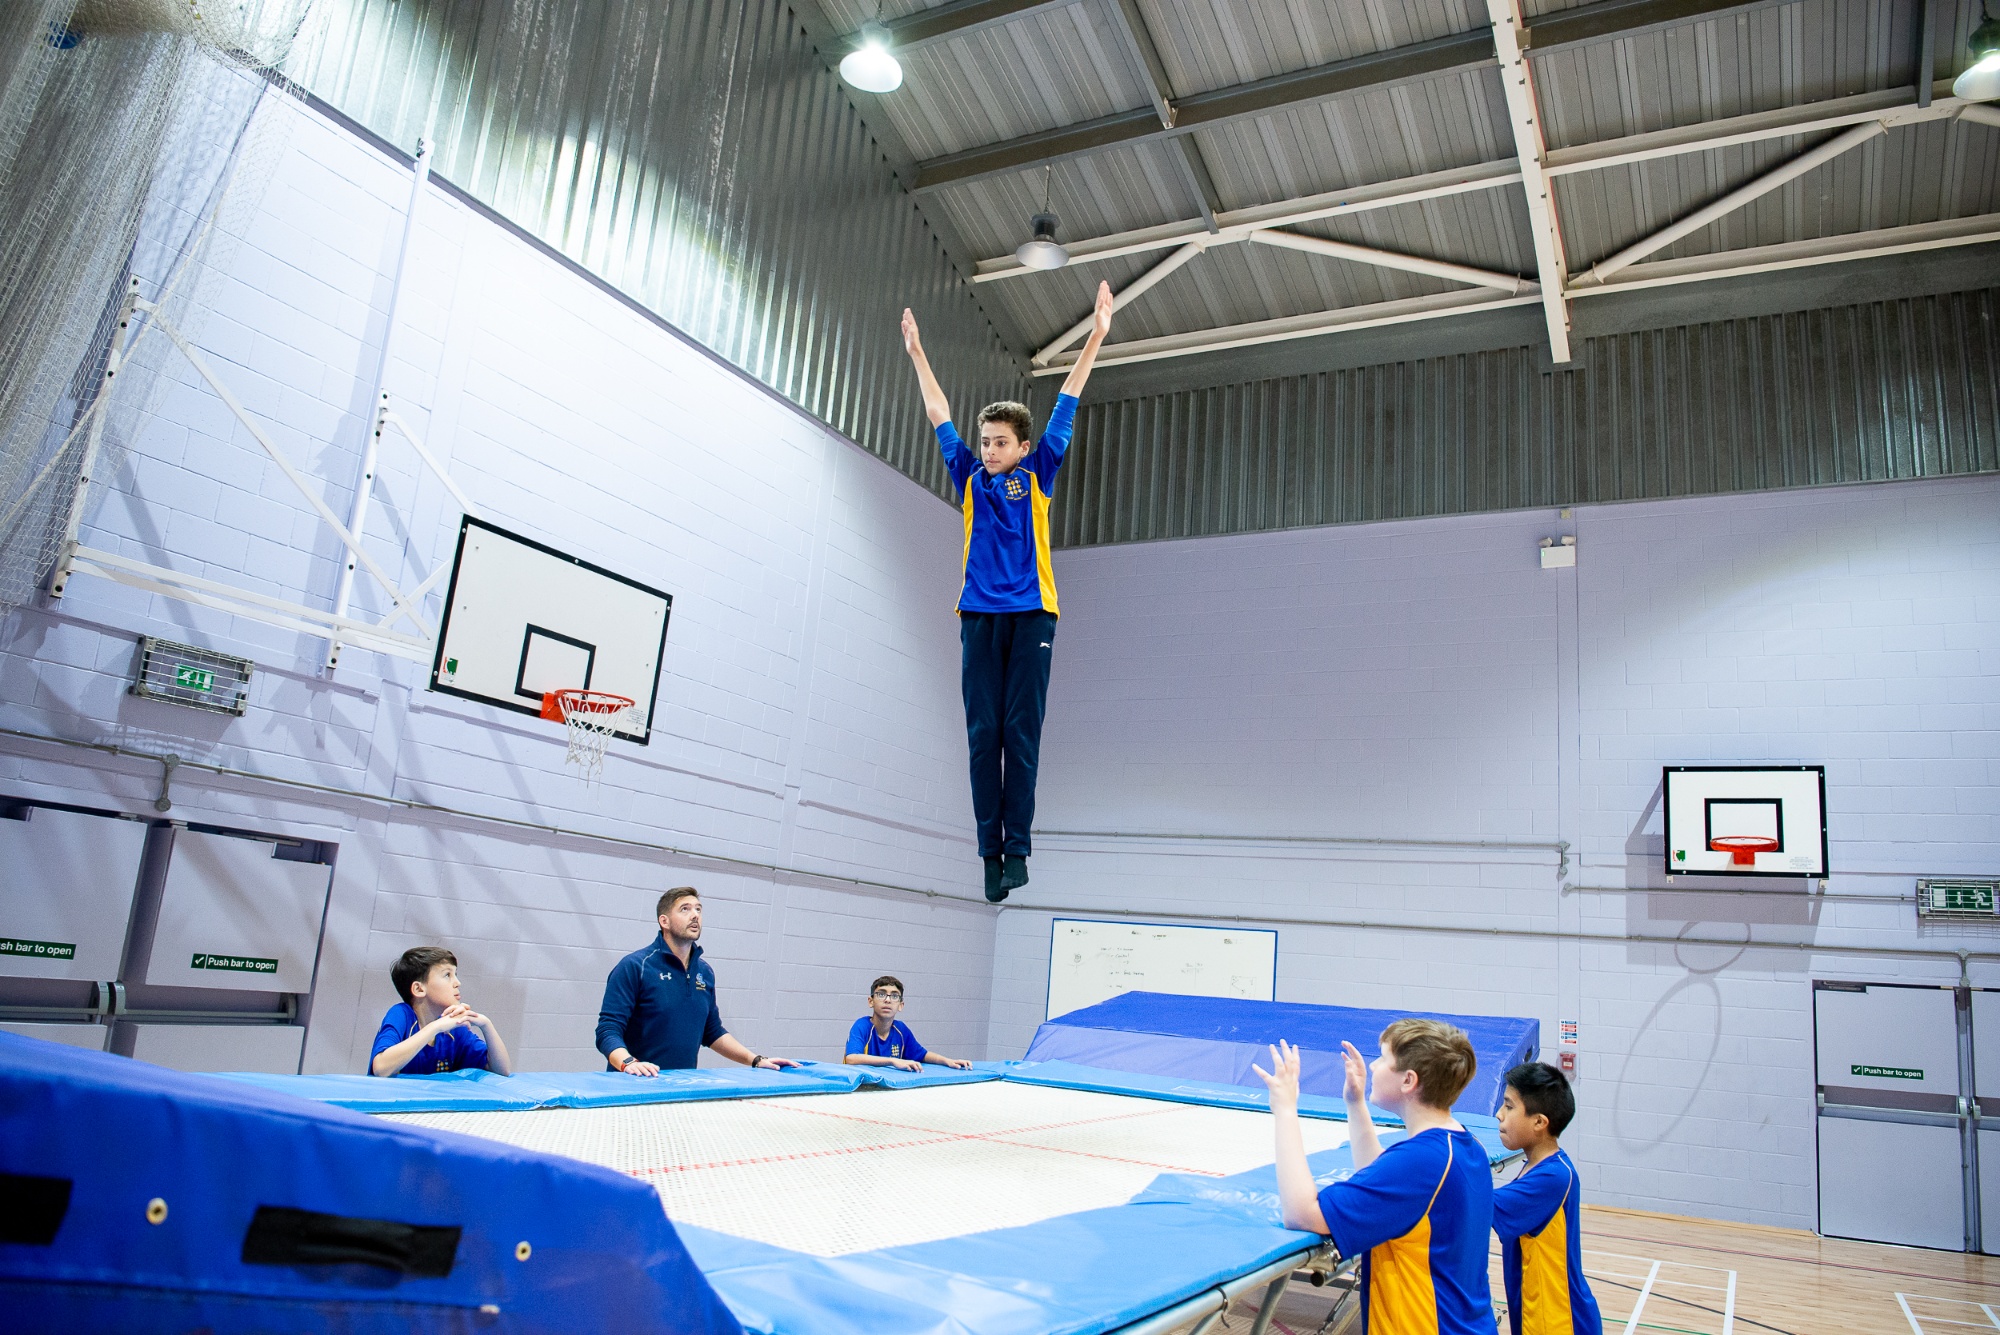 Rutlish students in a trampoline lesson